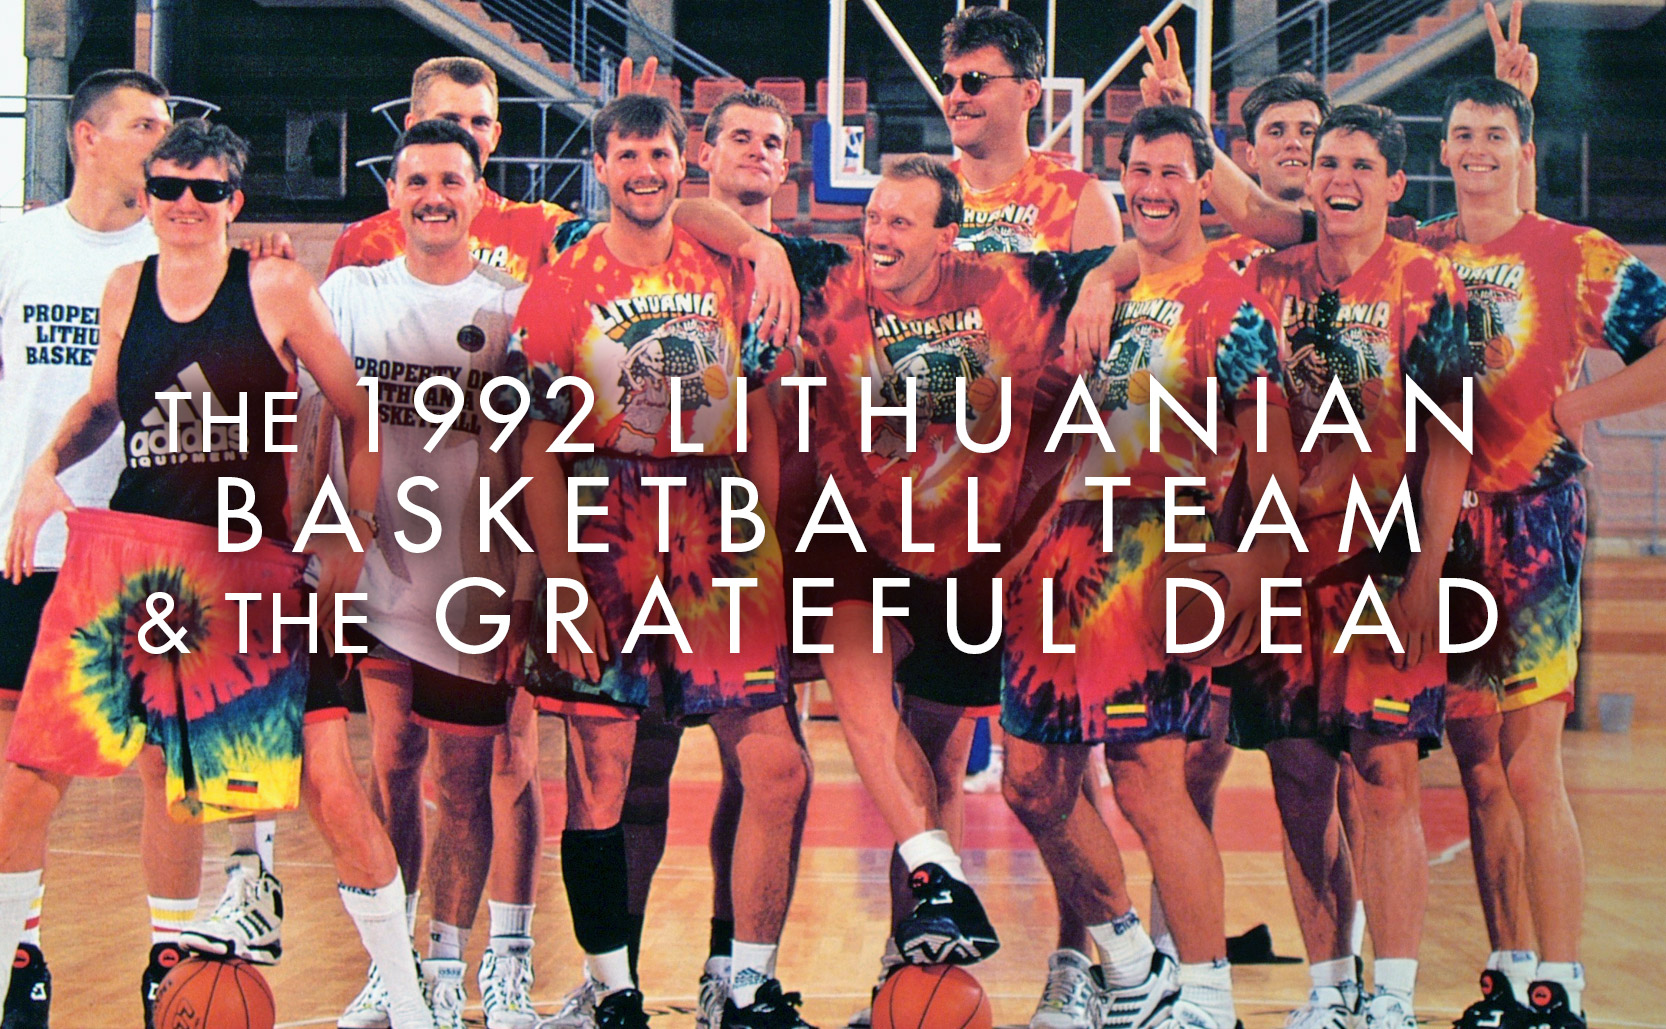 You are currently viewing the 1992 Lithuanian Basketball team & the Grateful Dead